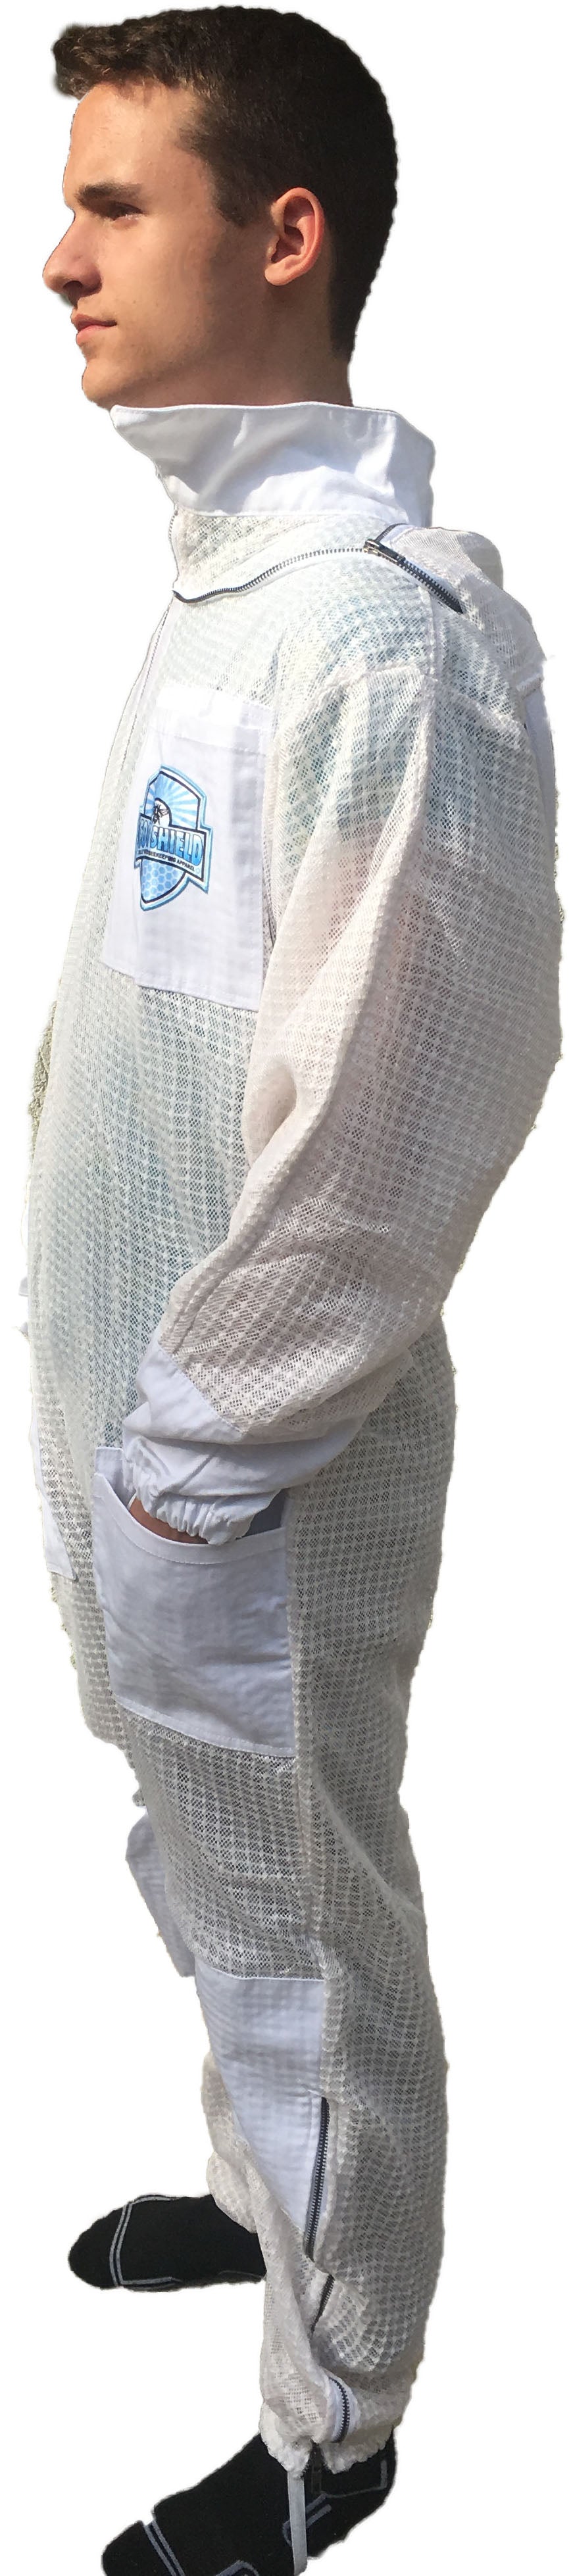 Cool Shield Ventilated Beekeeping Suits